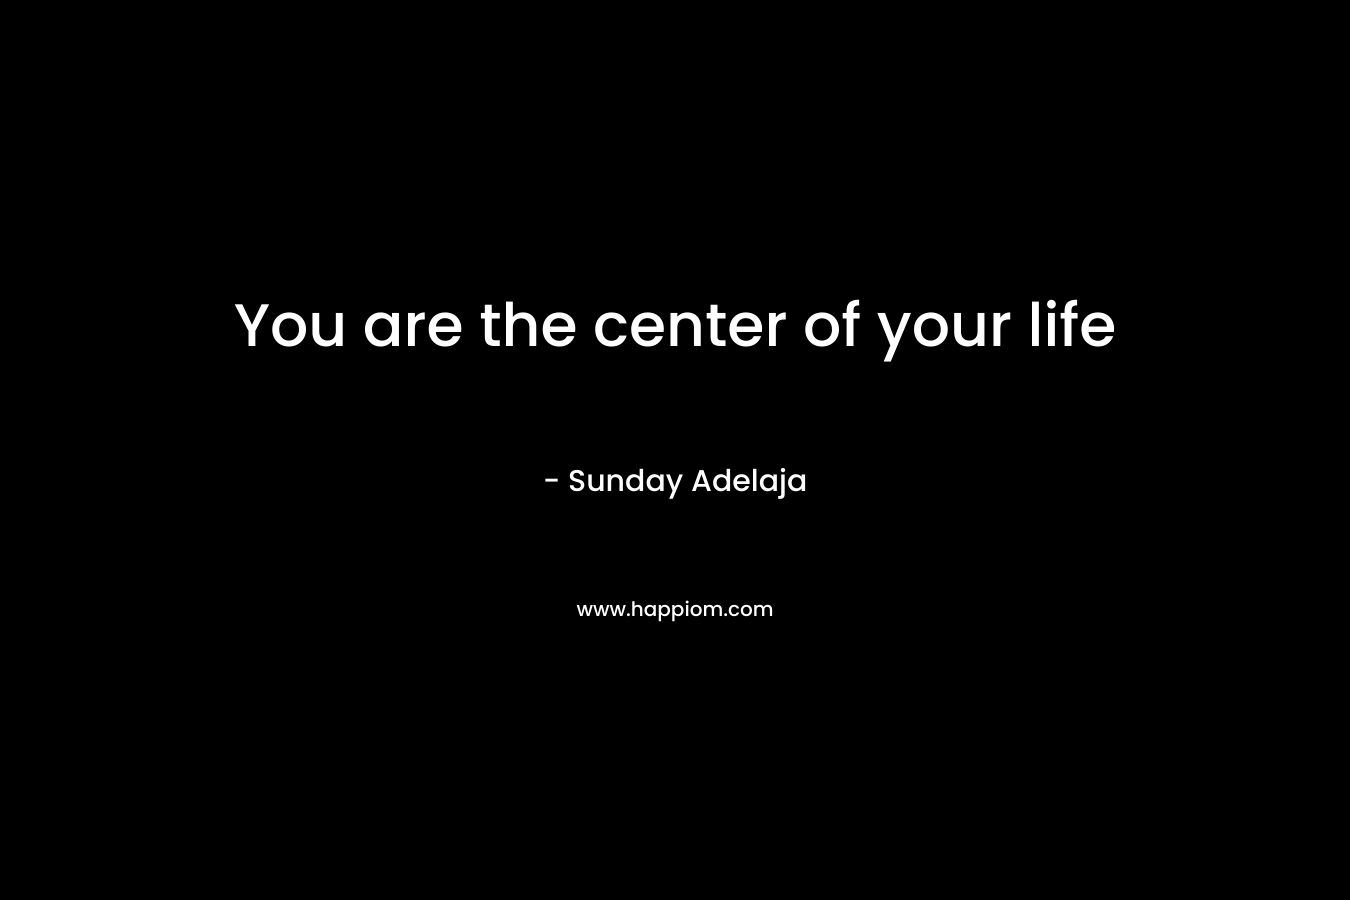 You are the center of your life